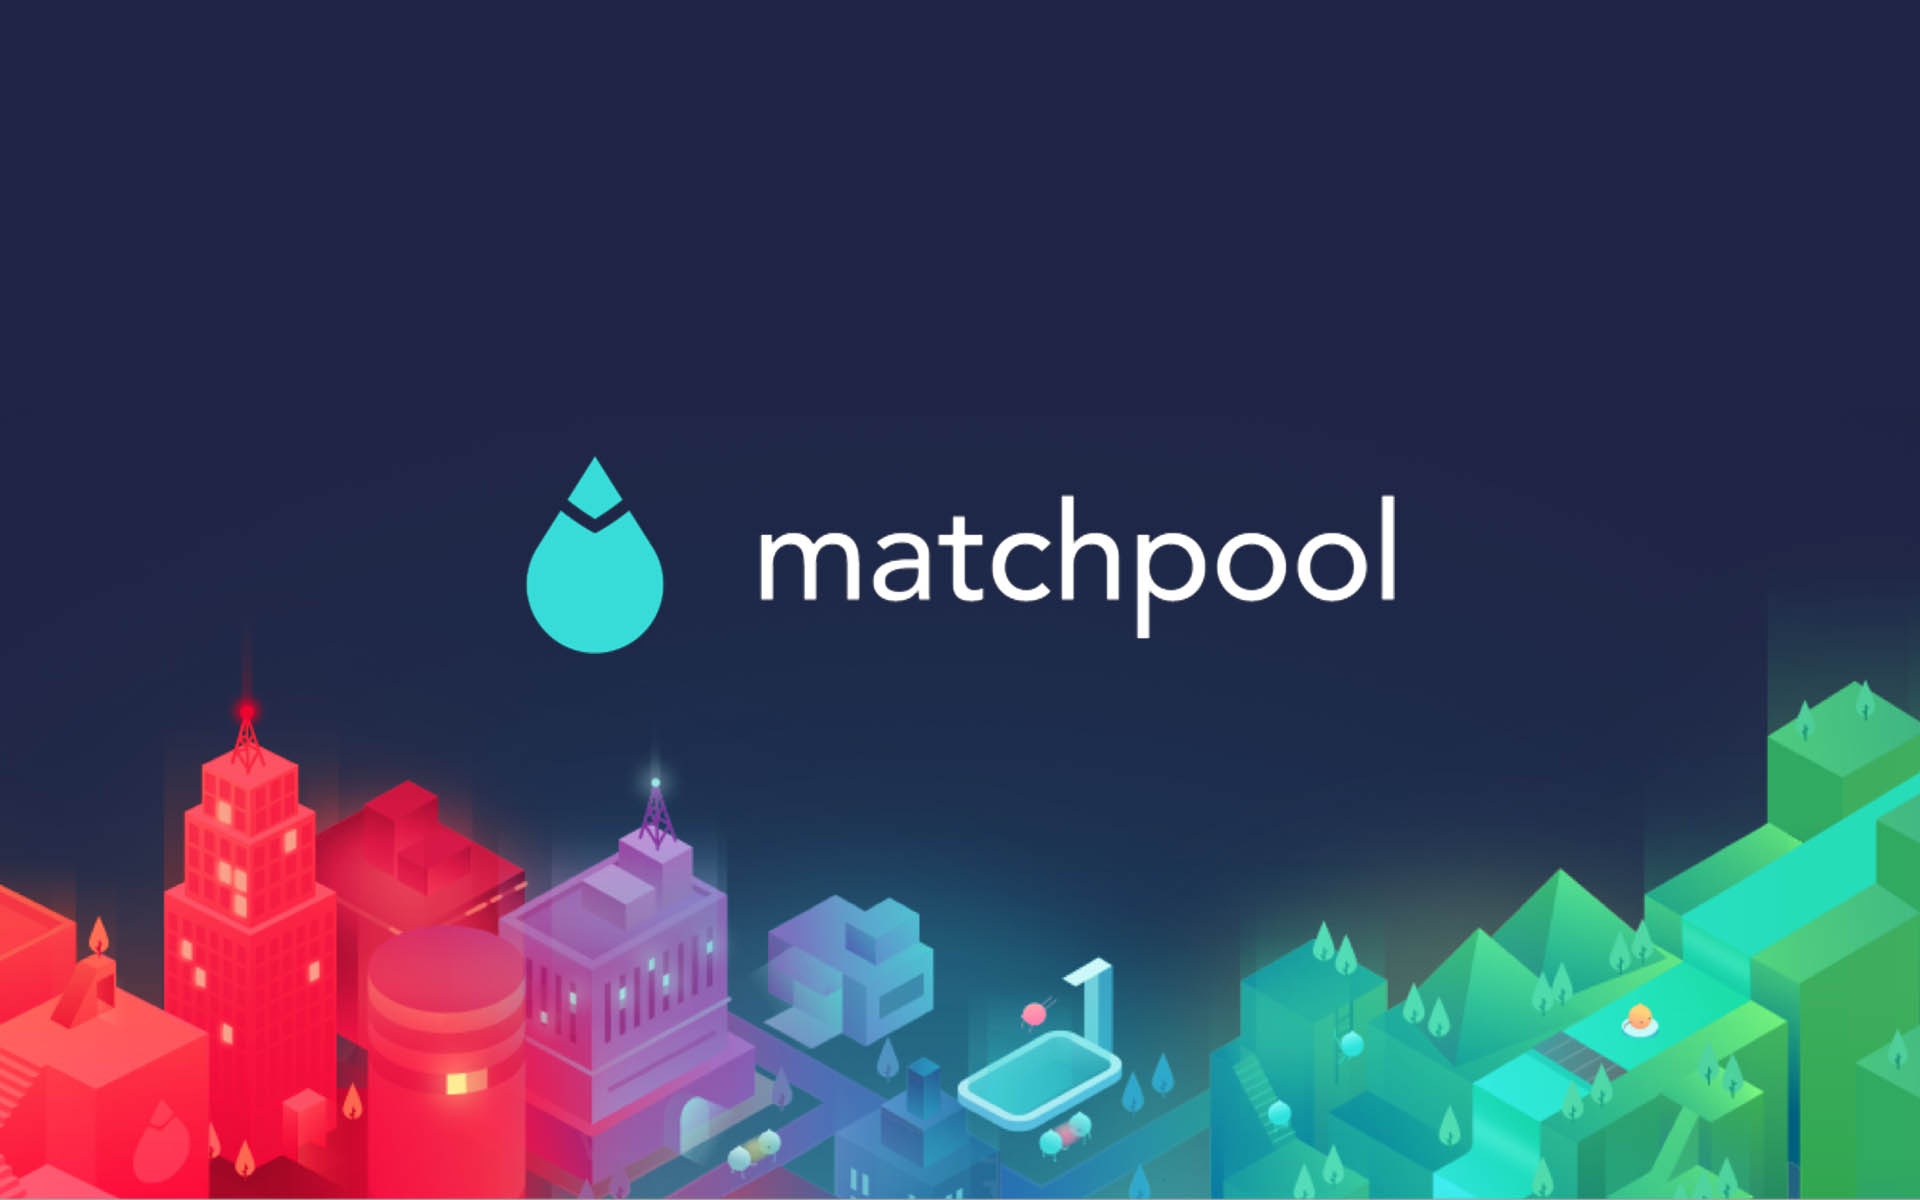 Matchpool Launches Alpha Release of Its Blockchain-based Matchmaking Platform